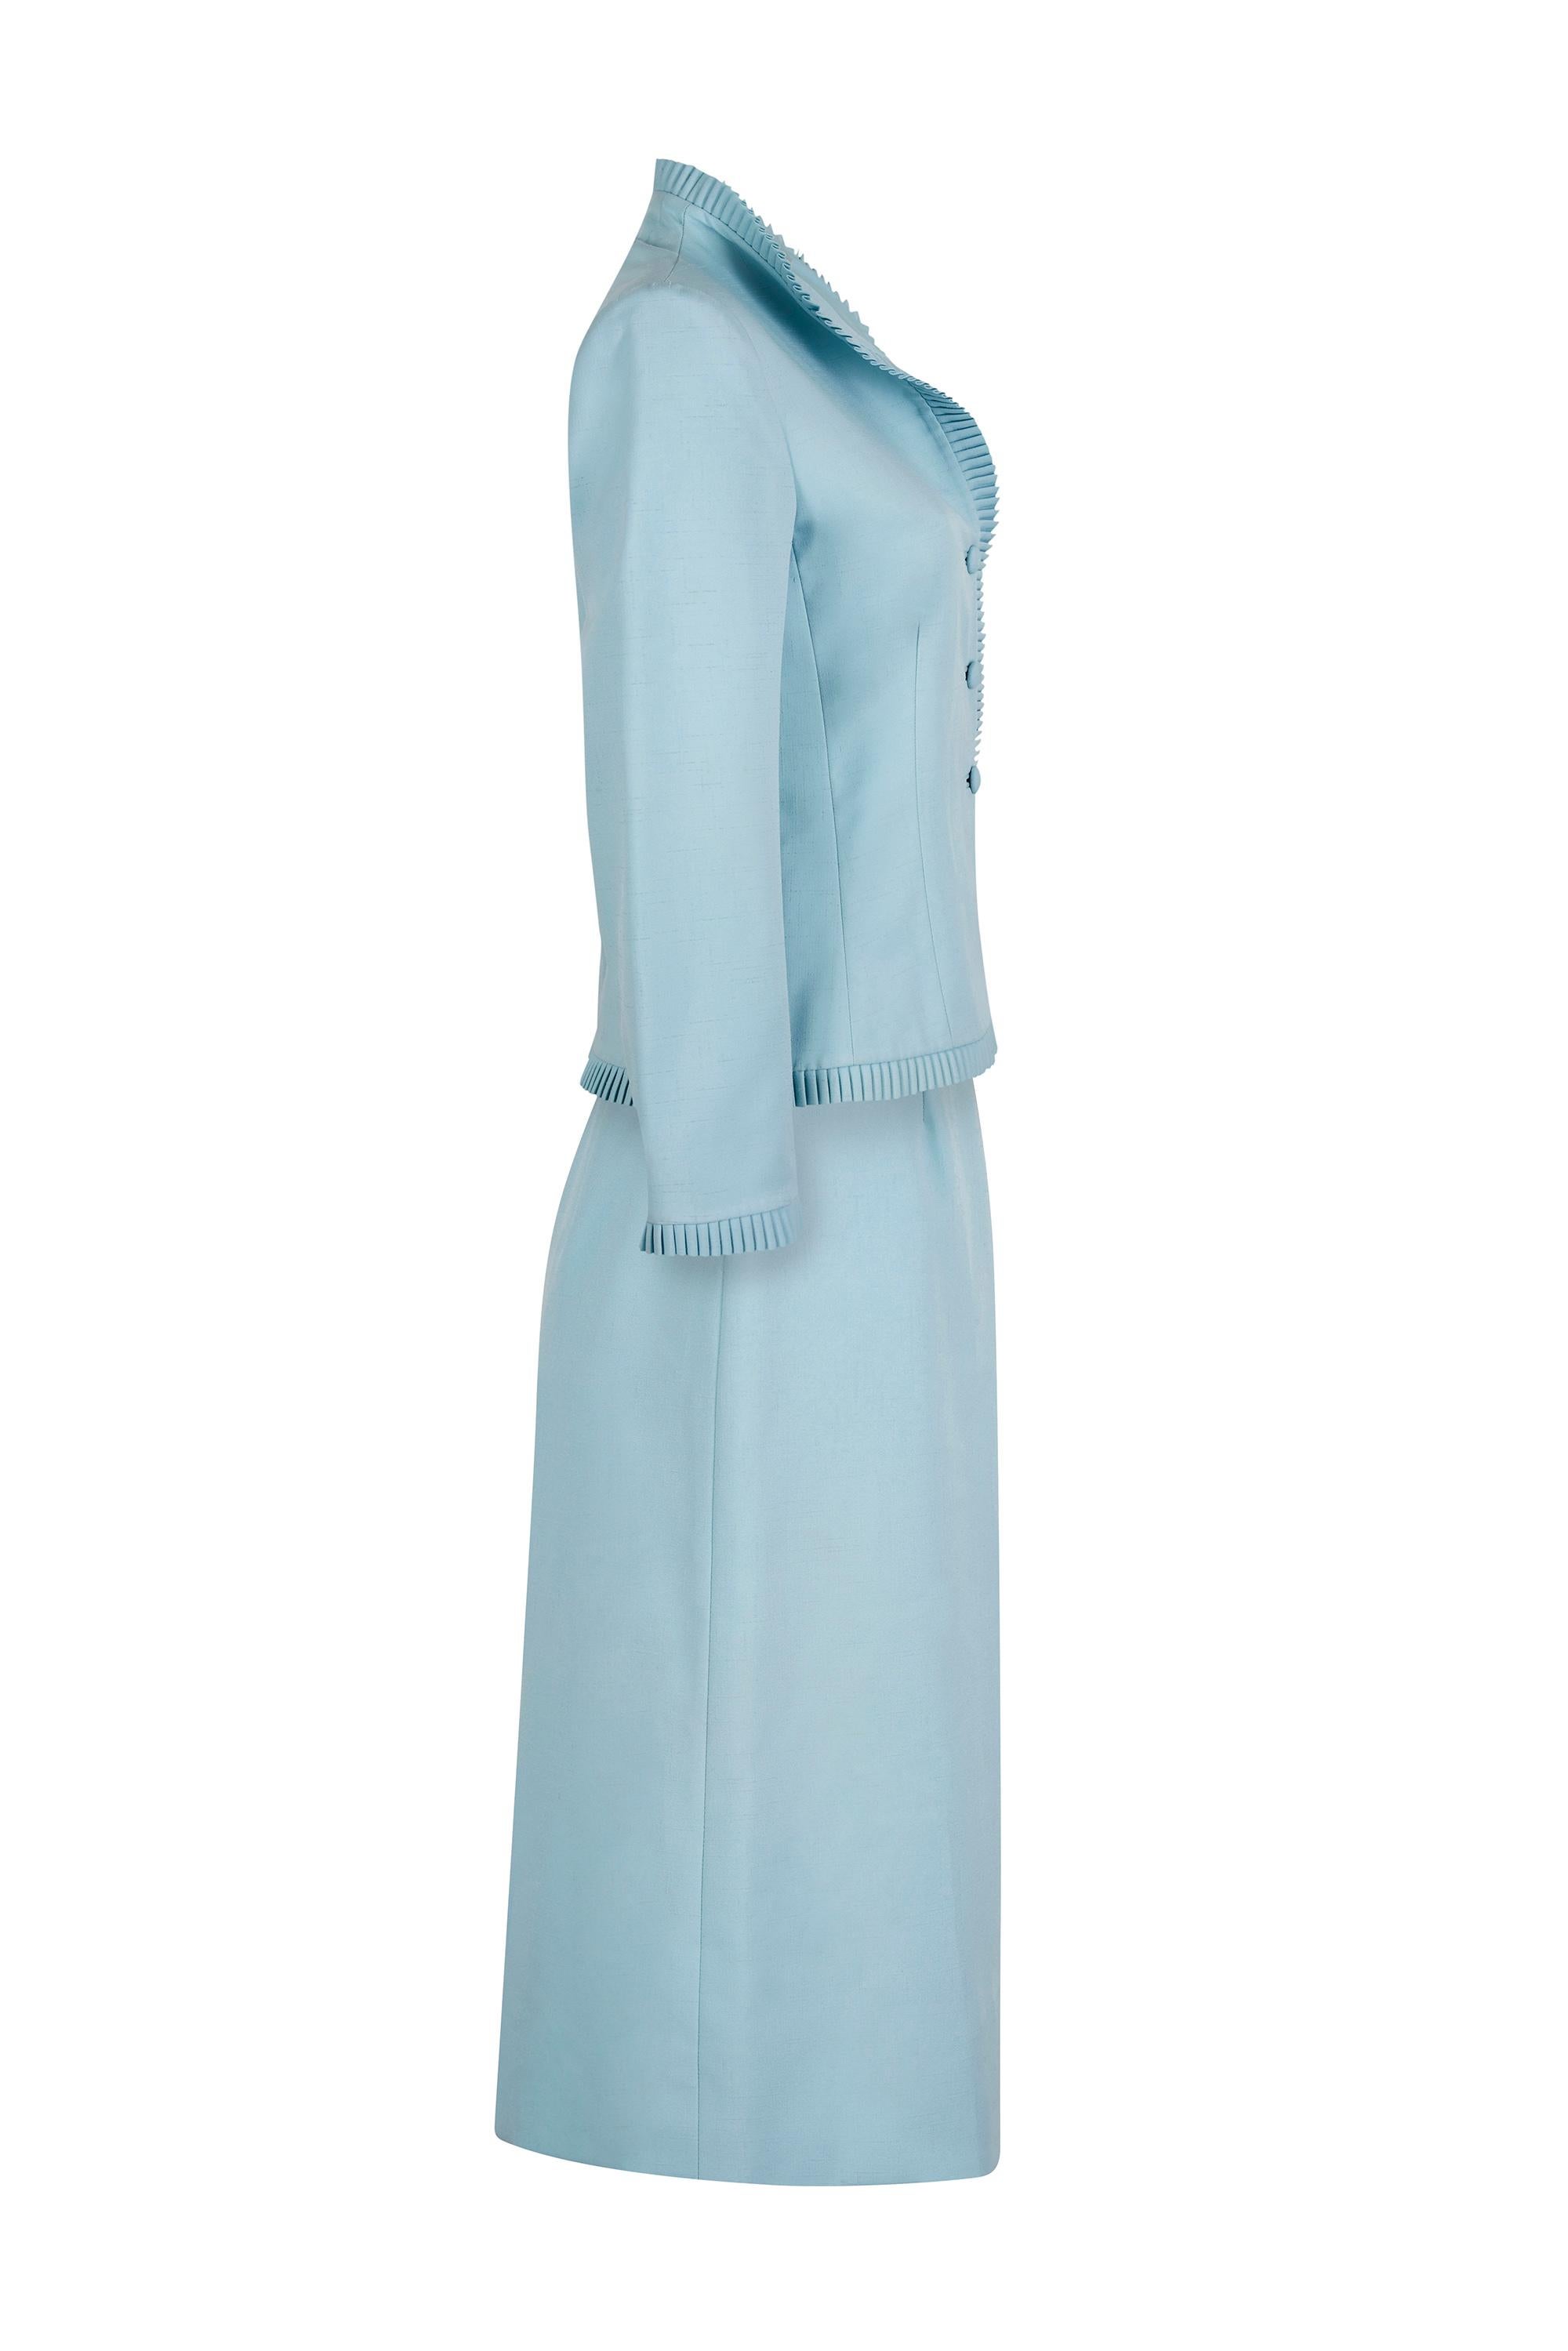 This lovely 1970s skirt suit in eggshell blue is by high end American apparel company Lilli Ann who's lines were celebrated for their beautiful, elaborately designed suits and coats. This beautiful ensemble is a perfect example of the quality and